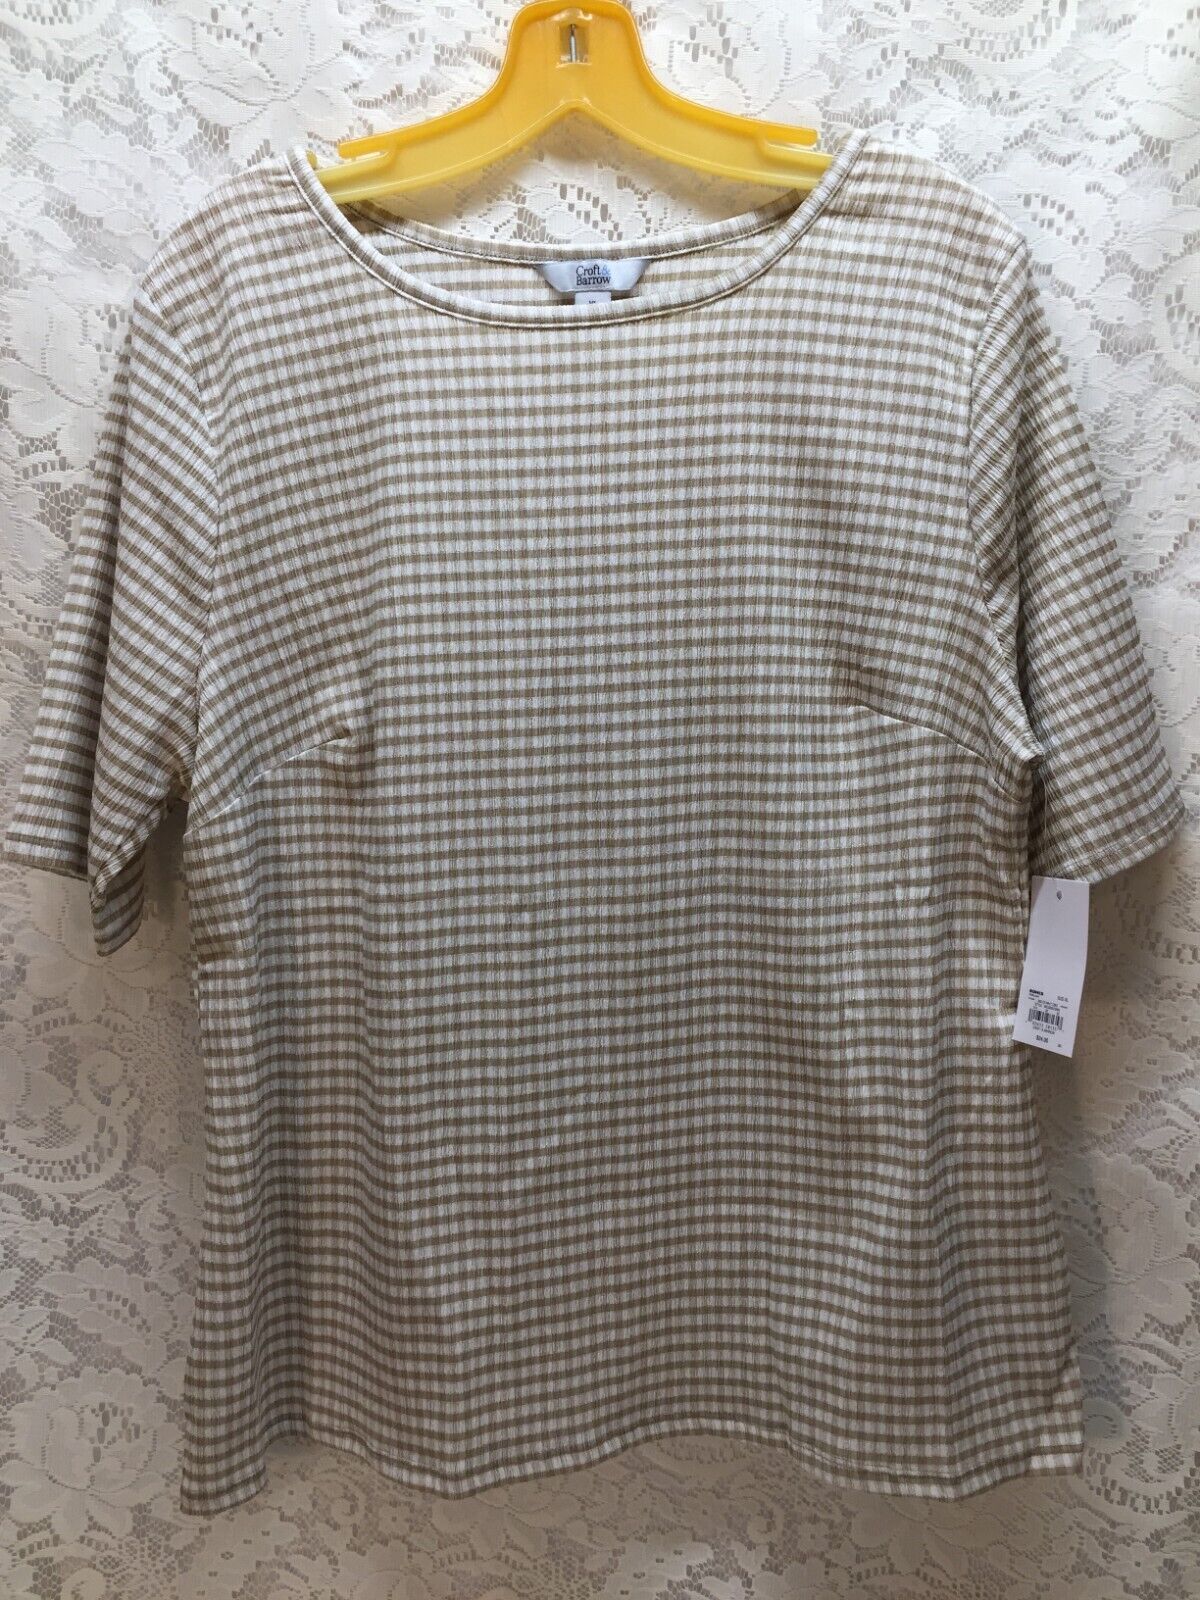 Primary image for Women's Top Shirt Croft & Barrow Size XL New With Tags